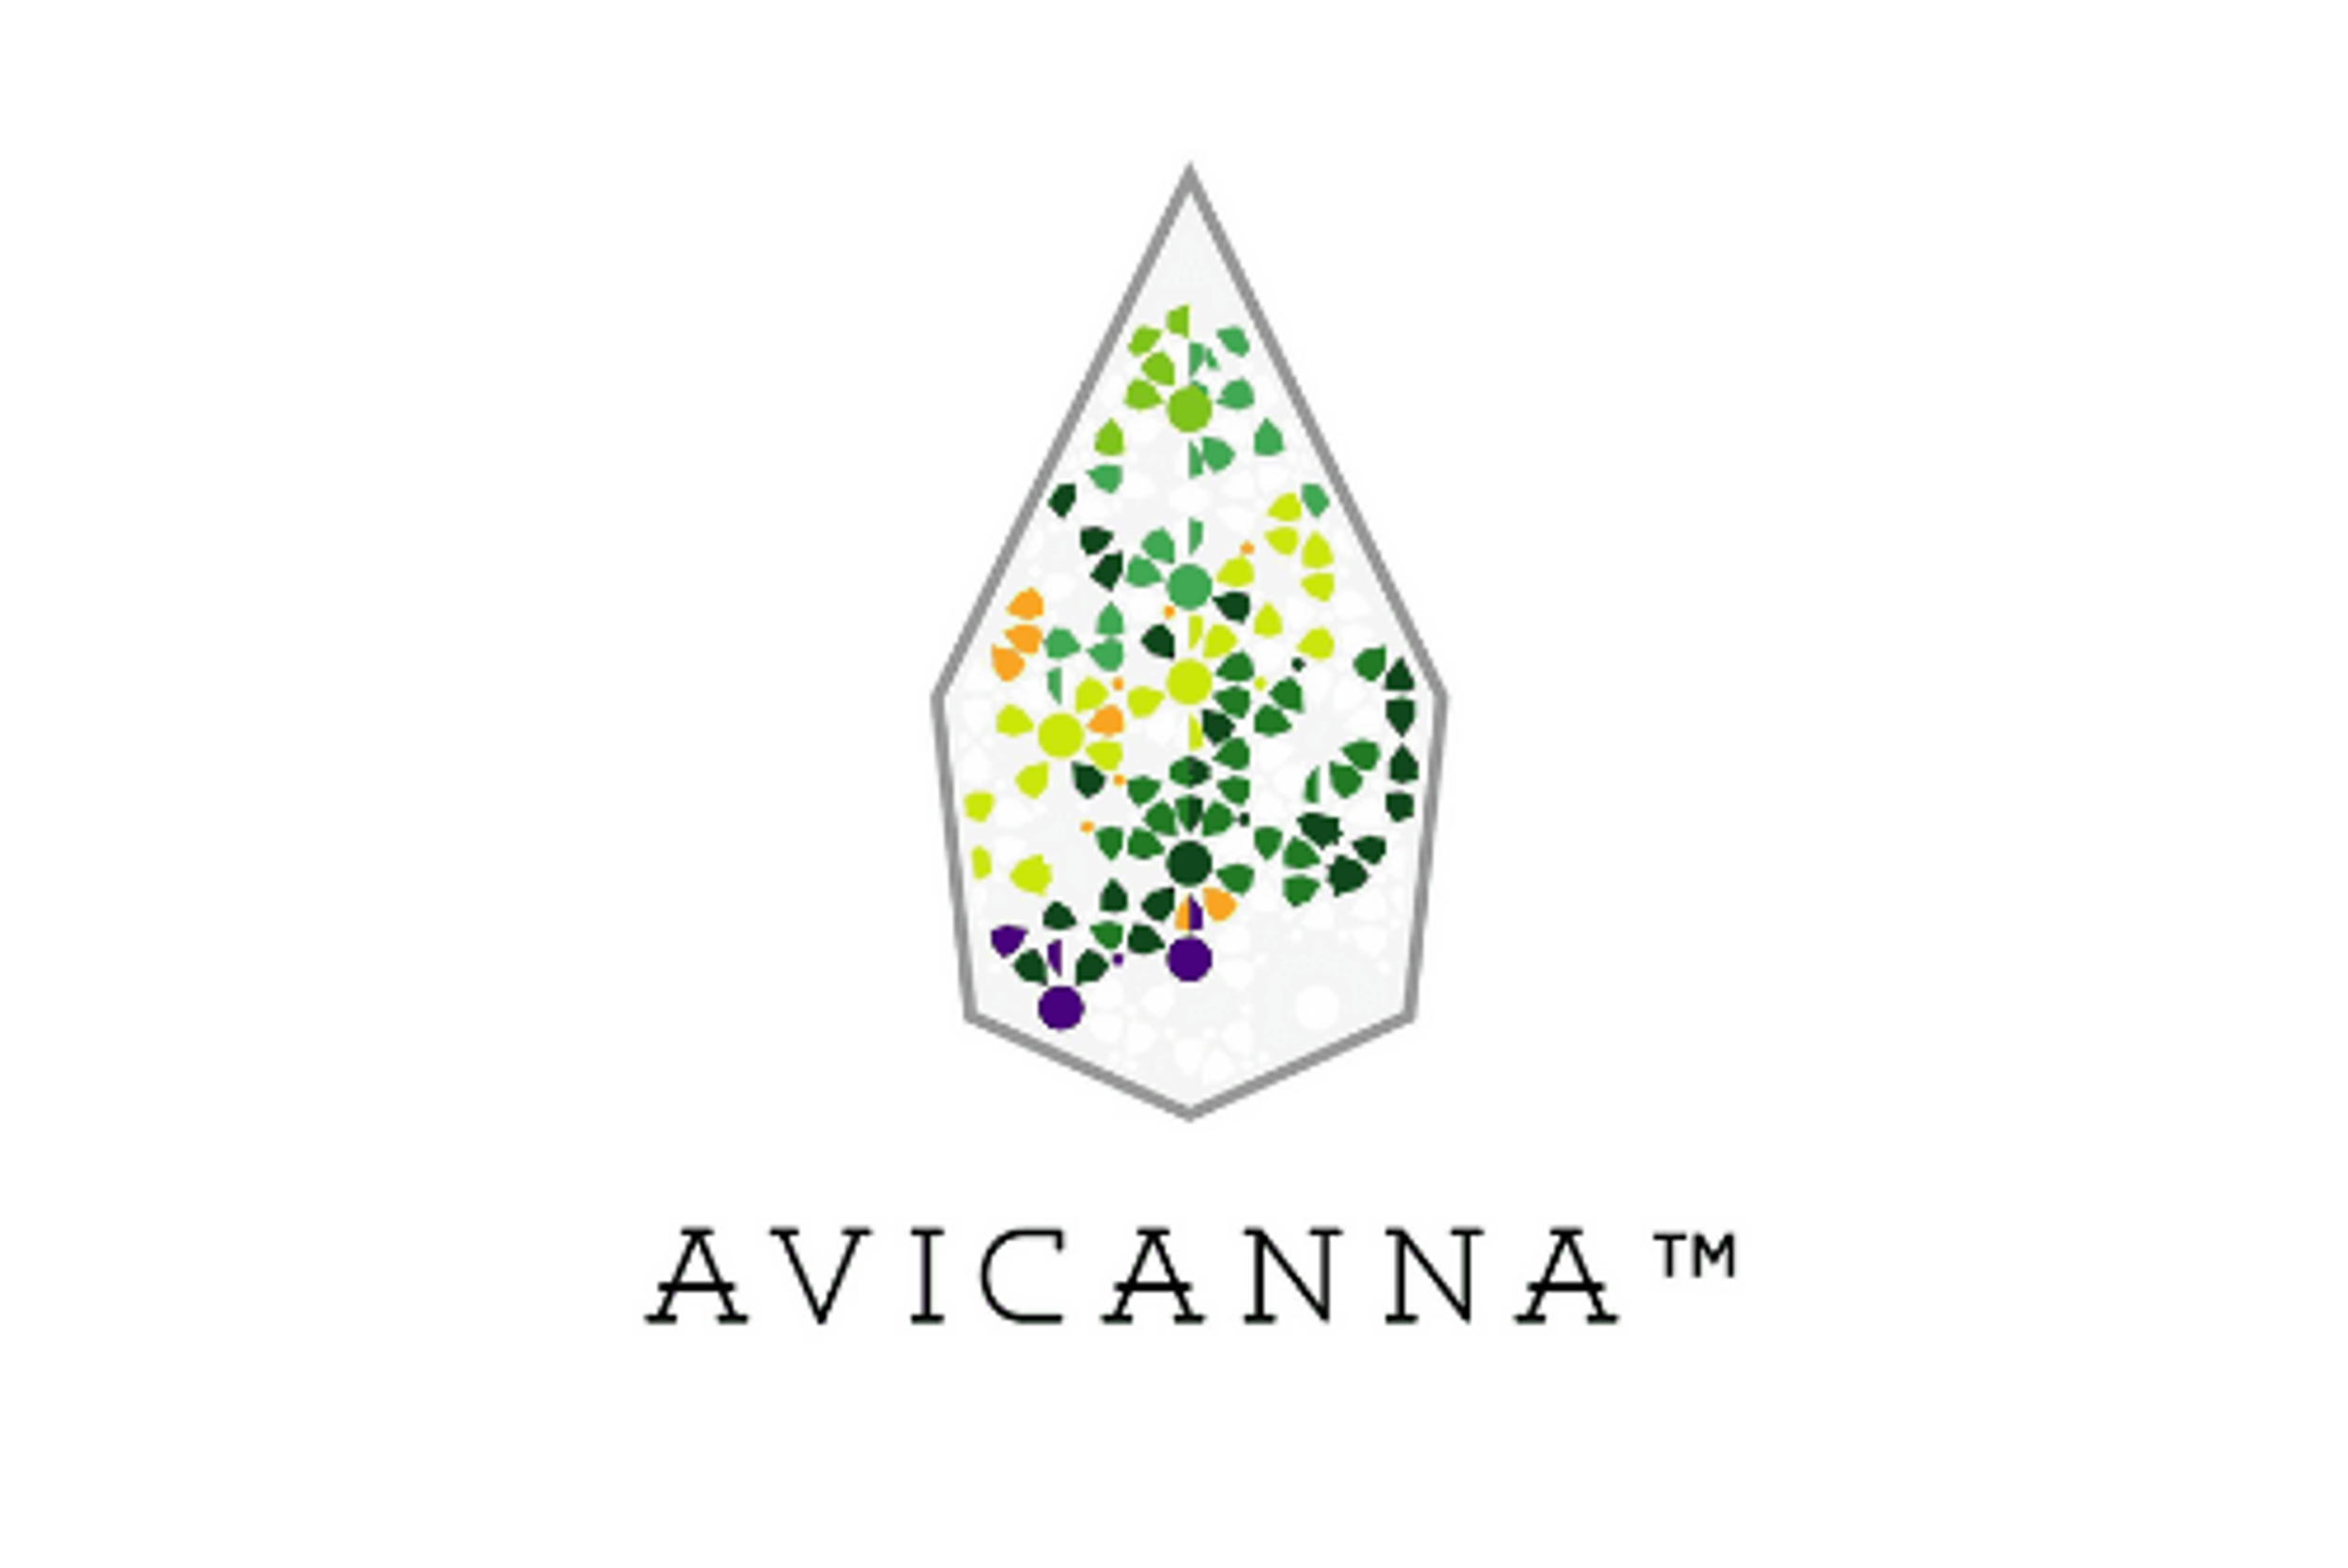 Avicanna Announces Closing of Non-Brokered Private Placement